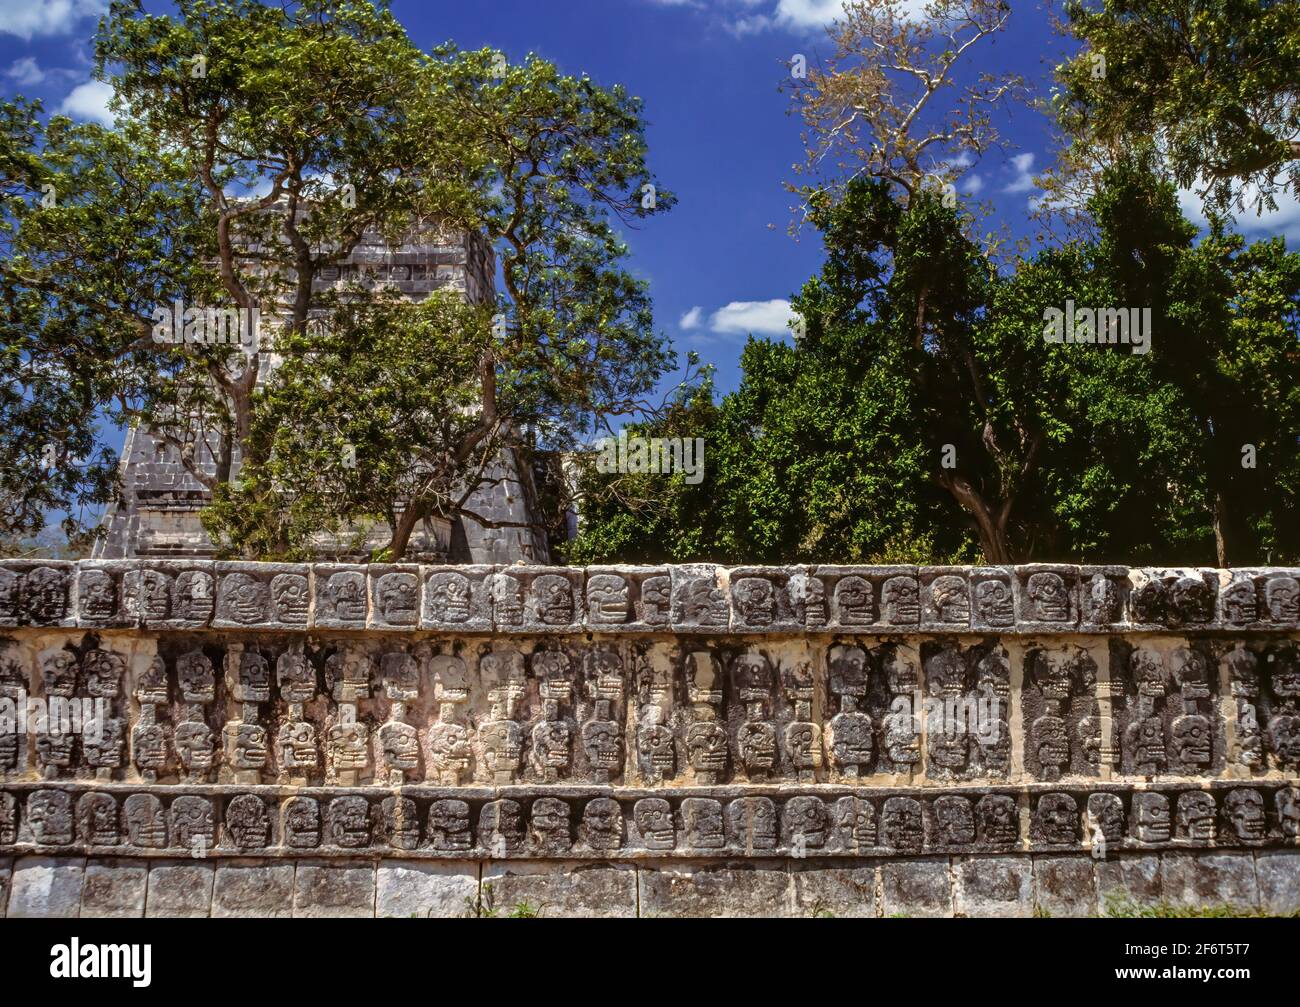 A tzompantli or skull rack is a type of wooden rack or palisade documented in several Mesoamerican civilizations, which was used for the public Stock Photo